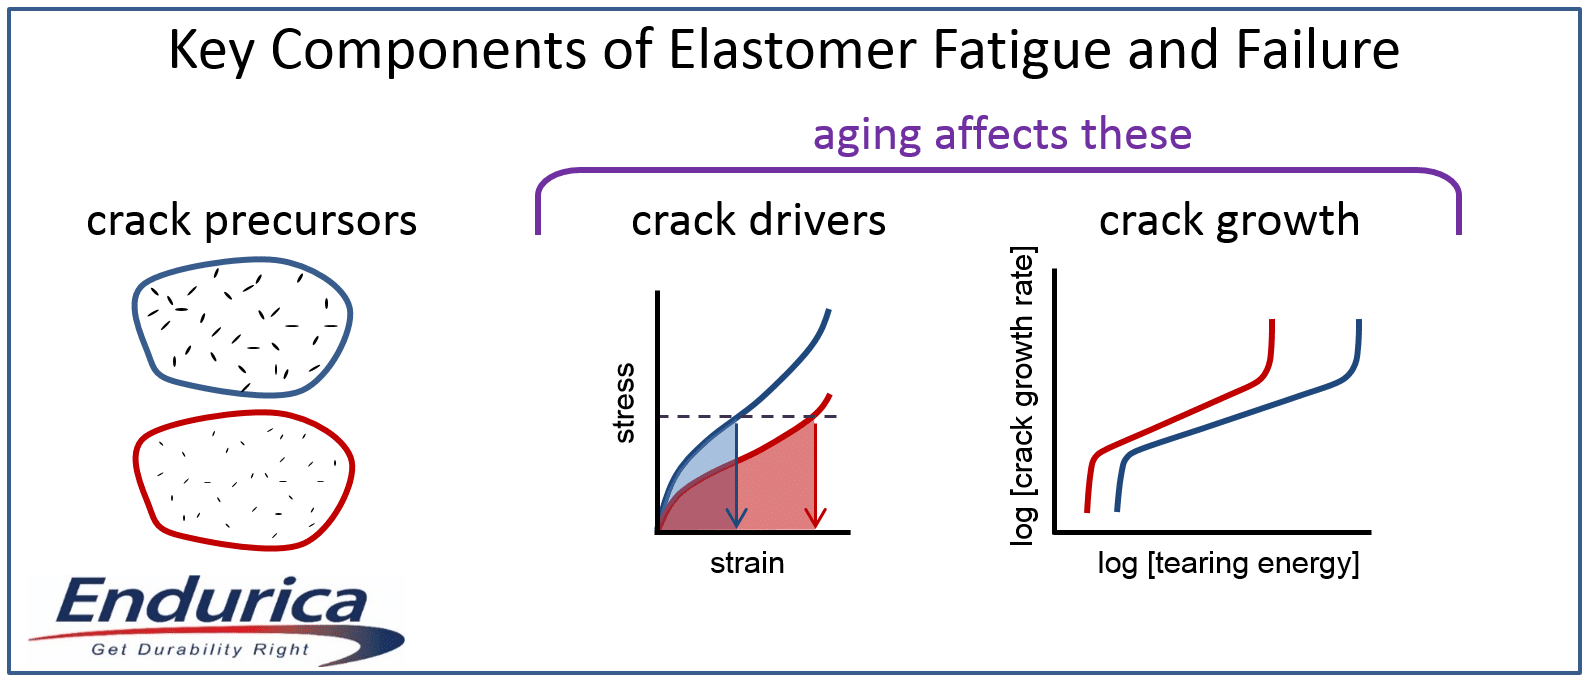 Key Components of Elastomer Fatigue and Failure